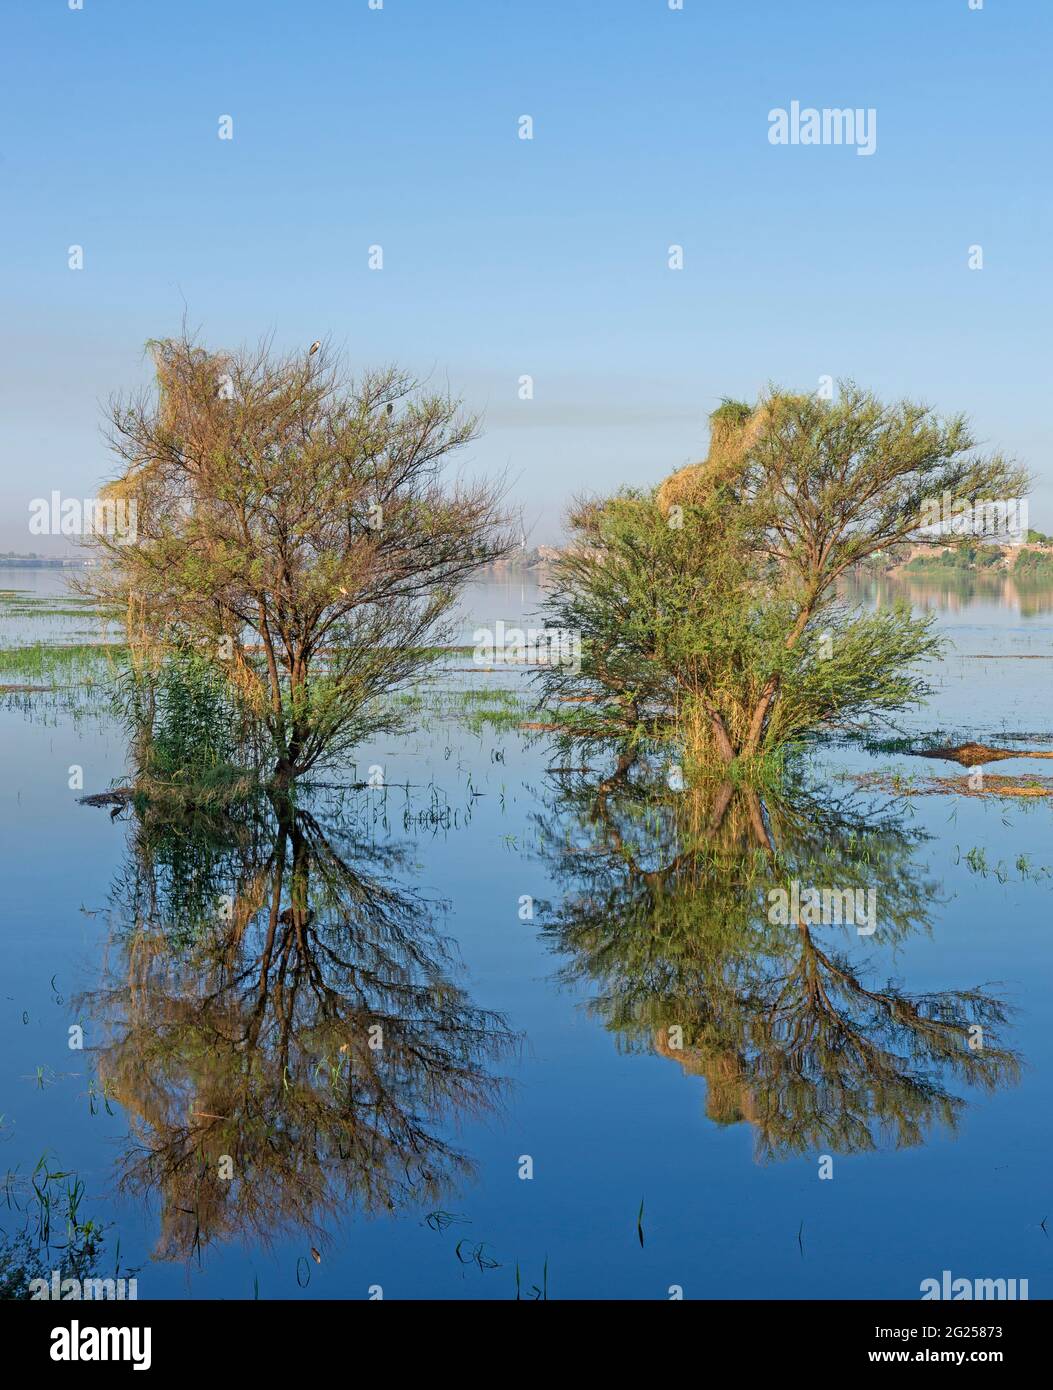 Trees during summer in rural flooded grassy field meadow countryside landscape setting with reflection in water Stock Photo